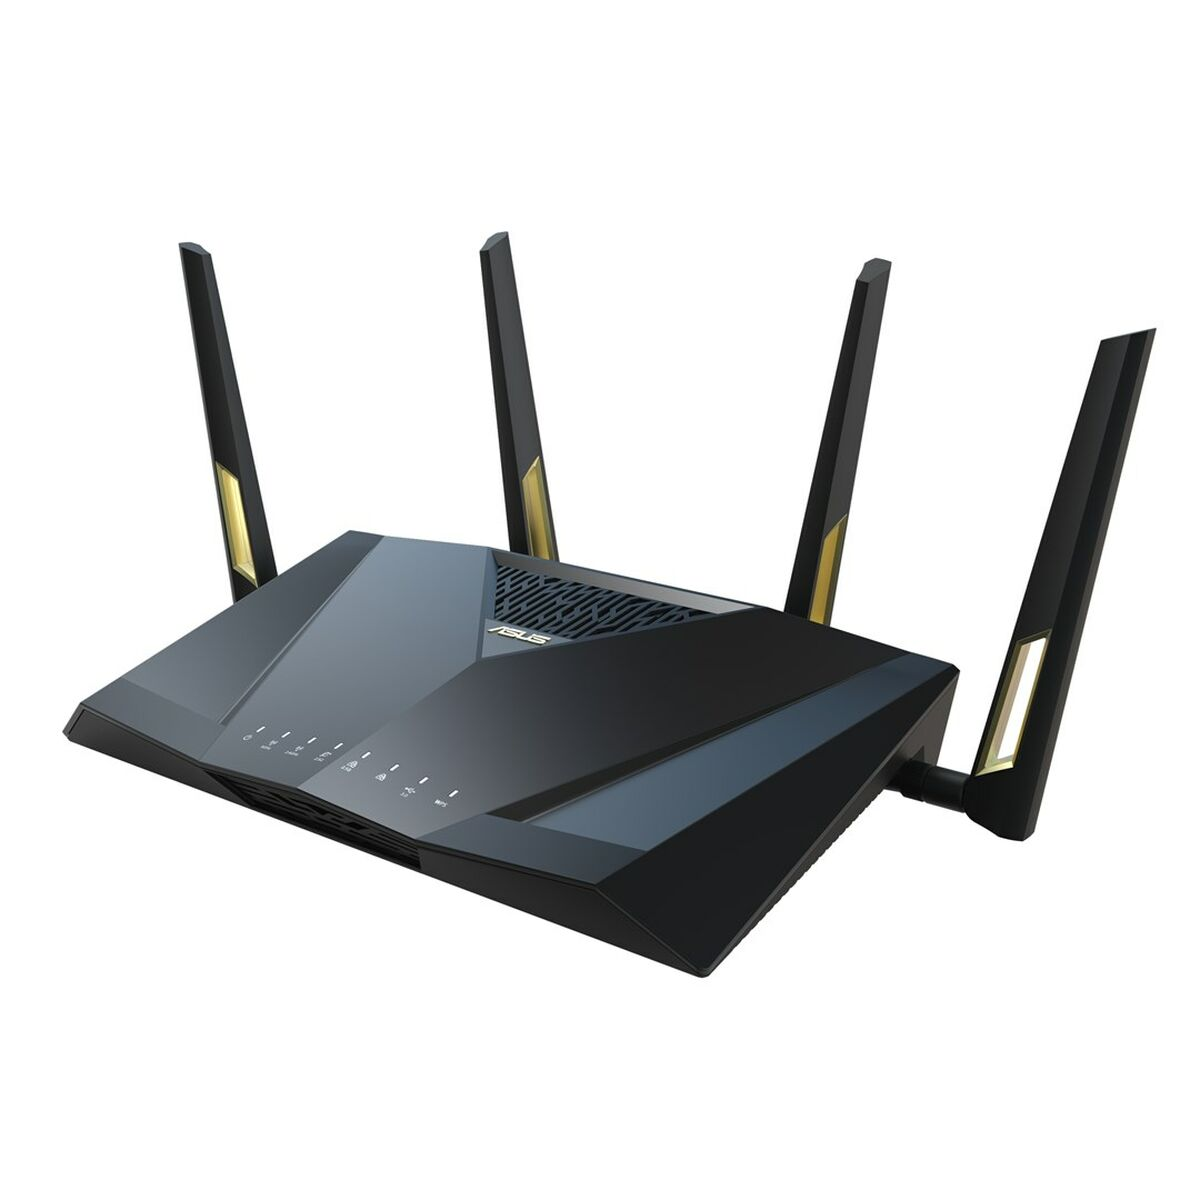 PRO RT-AX88U ASUS Router